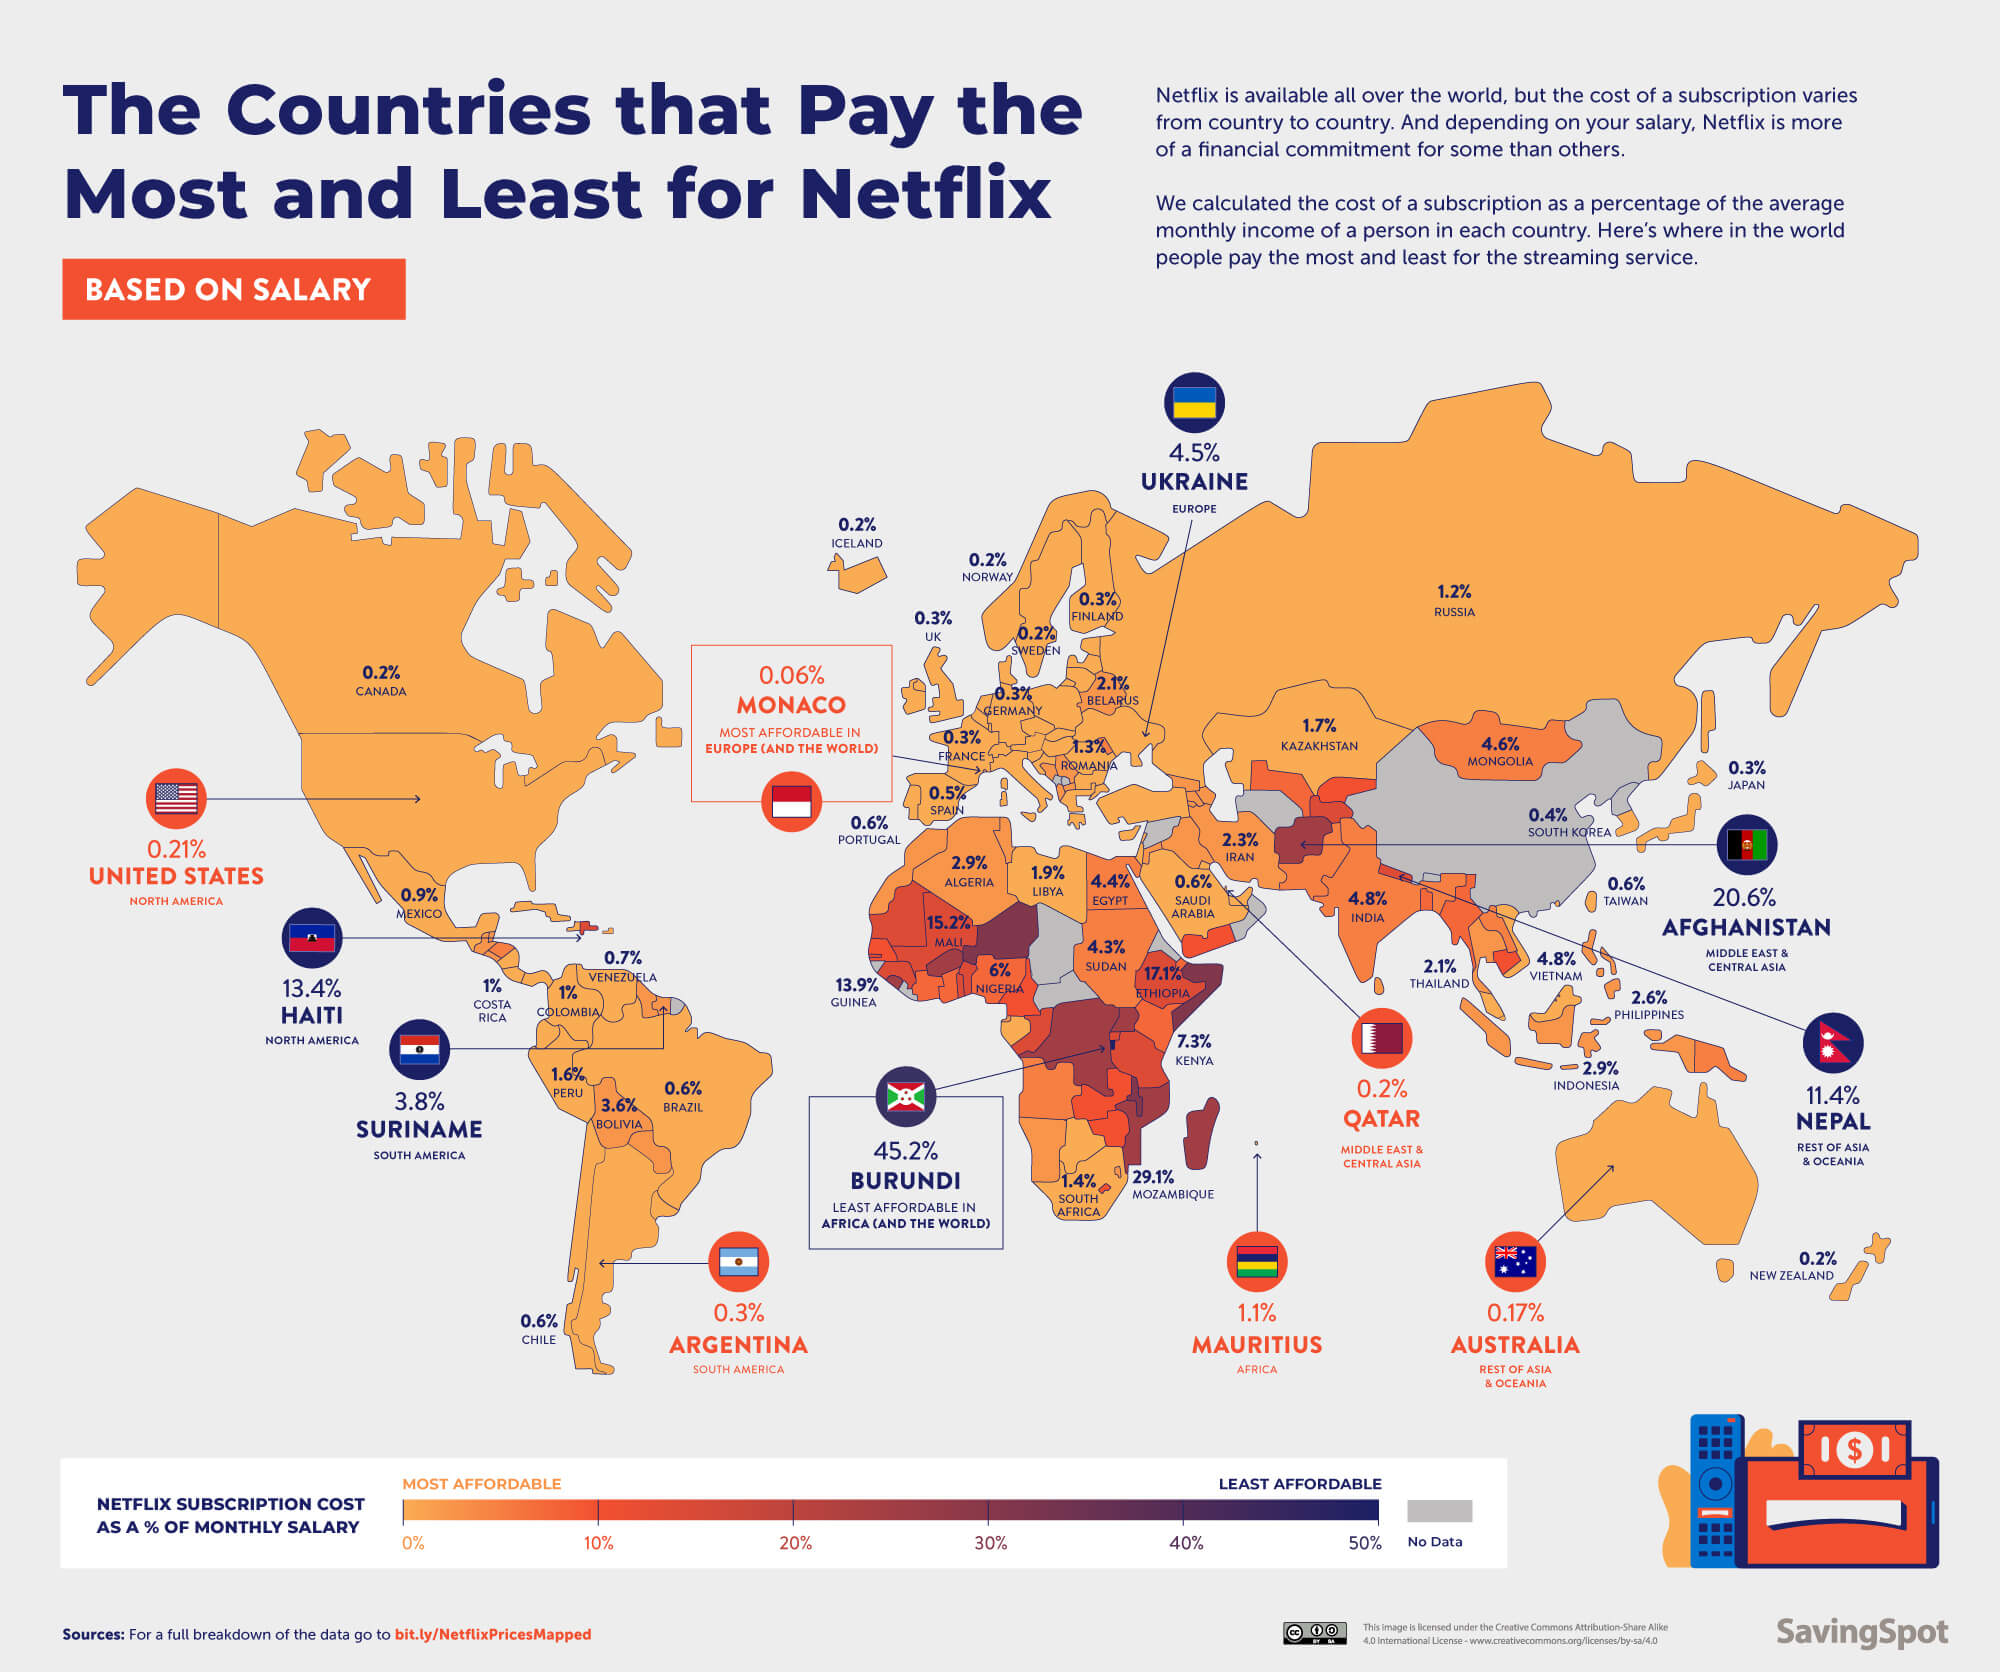 Where in the world do you get more Netflix for your salary